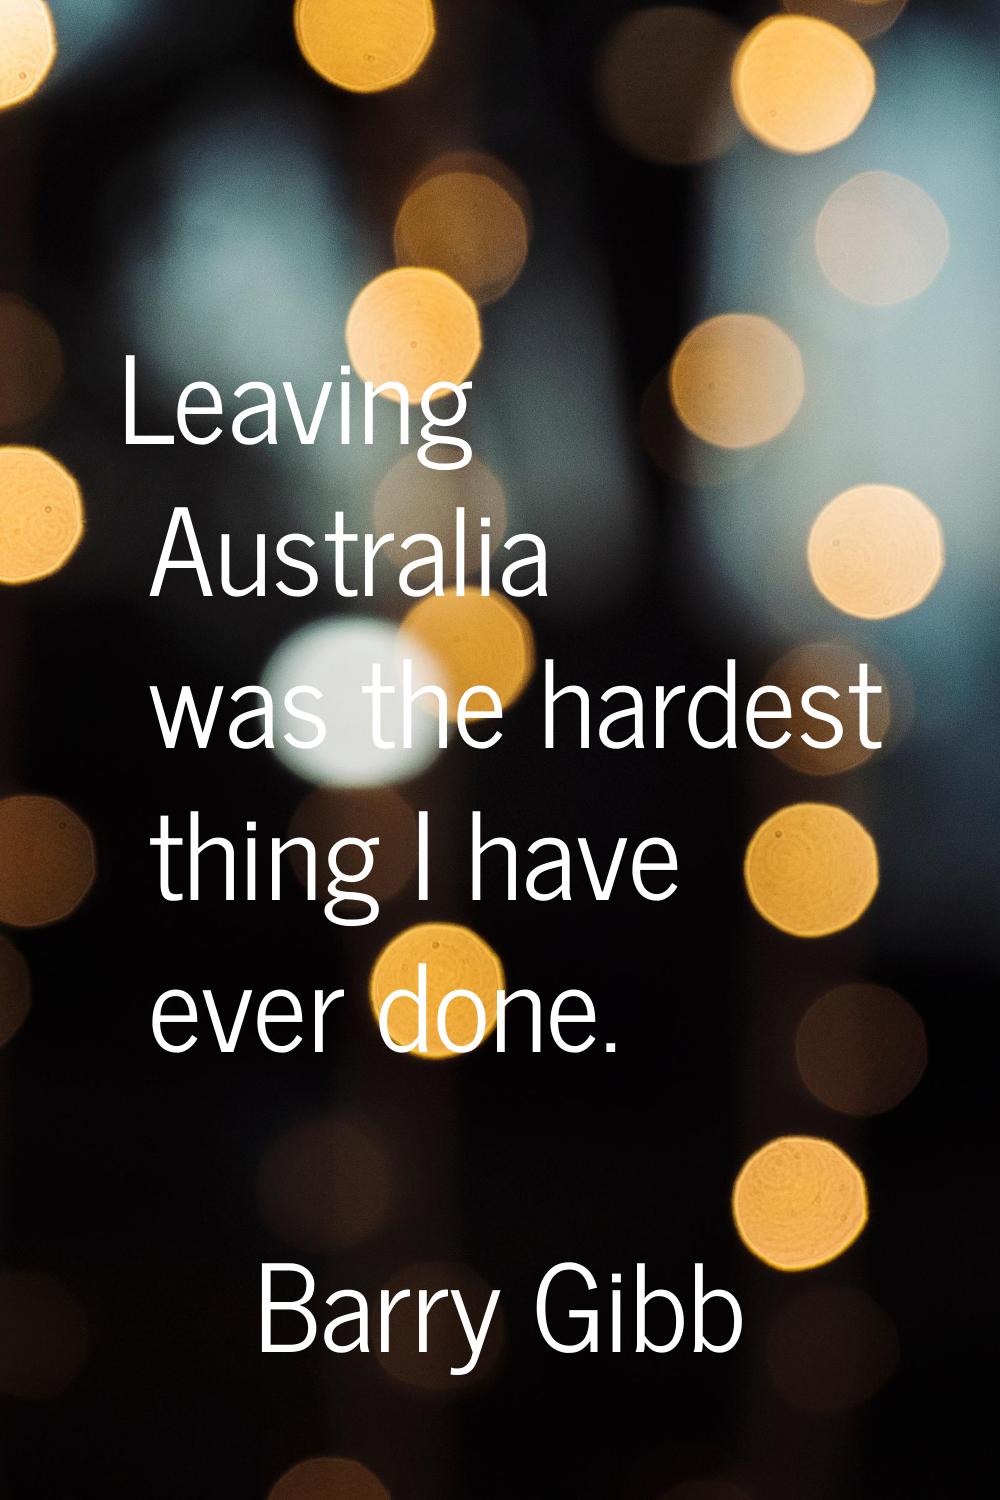 Leaving Australia was the hardest thing I have ever done.